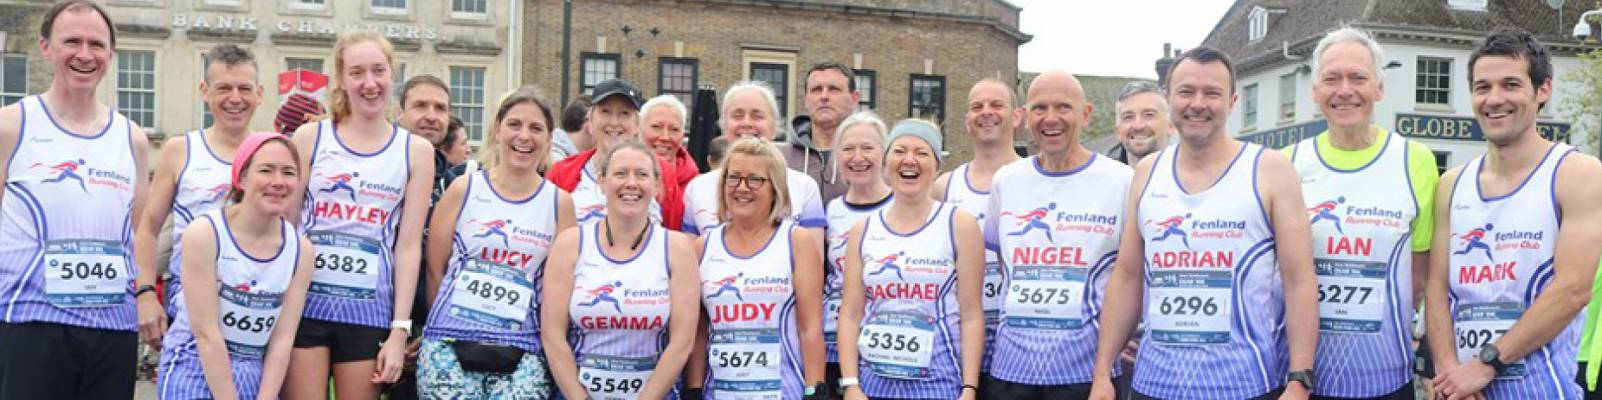 Contact us - Fenland Running Club